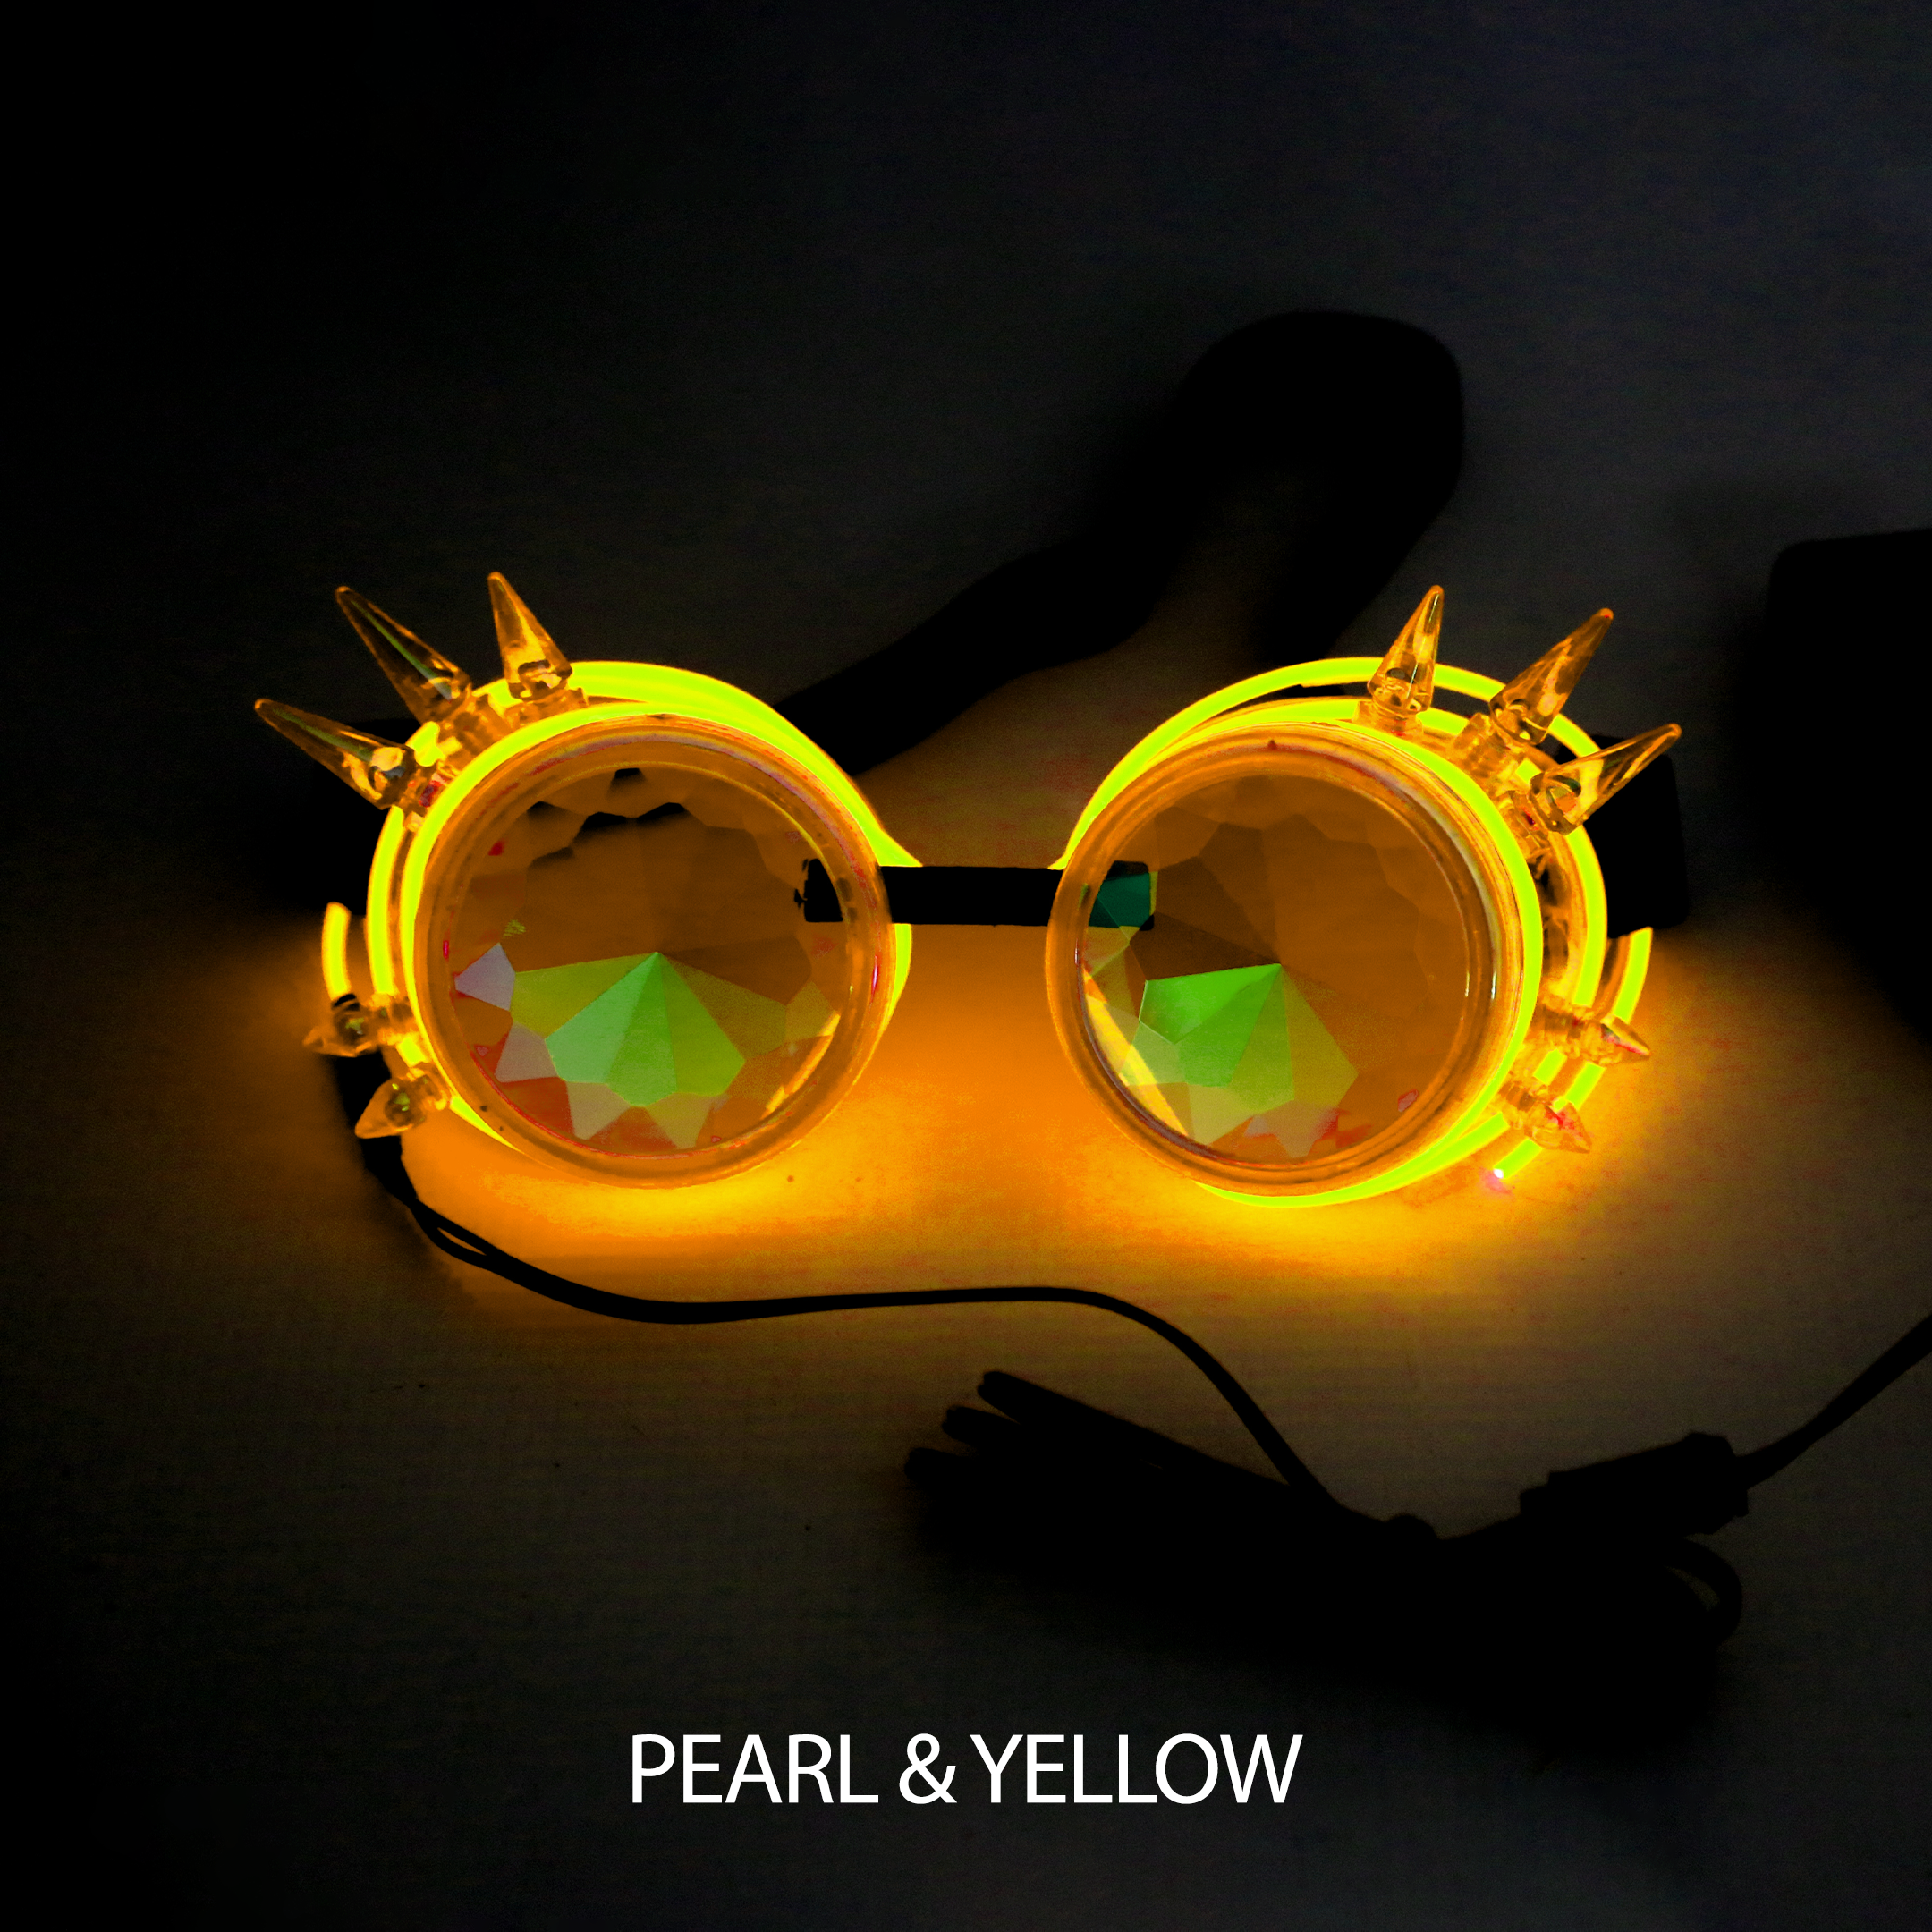 Gold LED steampunk Kaleidoscope glasses Electro Glow | South Africa's Best LED Festival Gear & Rave Clothes - festivals outfits, clothes festival, festival clothing south africa, festival ideas outfits, festival outfits rave, festival wear, steam punk goggle, rave glasses, outfit for a rave, kaleidoscope glasses, diffraction glasses, clothes for a rave, rave sunglasses, spectral glasses, rave goggles, clothes for a rave, rave clothing south africa, festival wear south africa, accessories festival